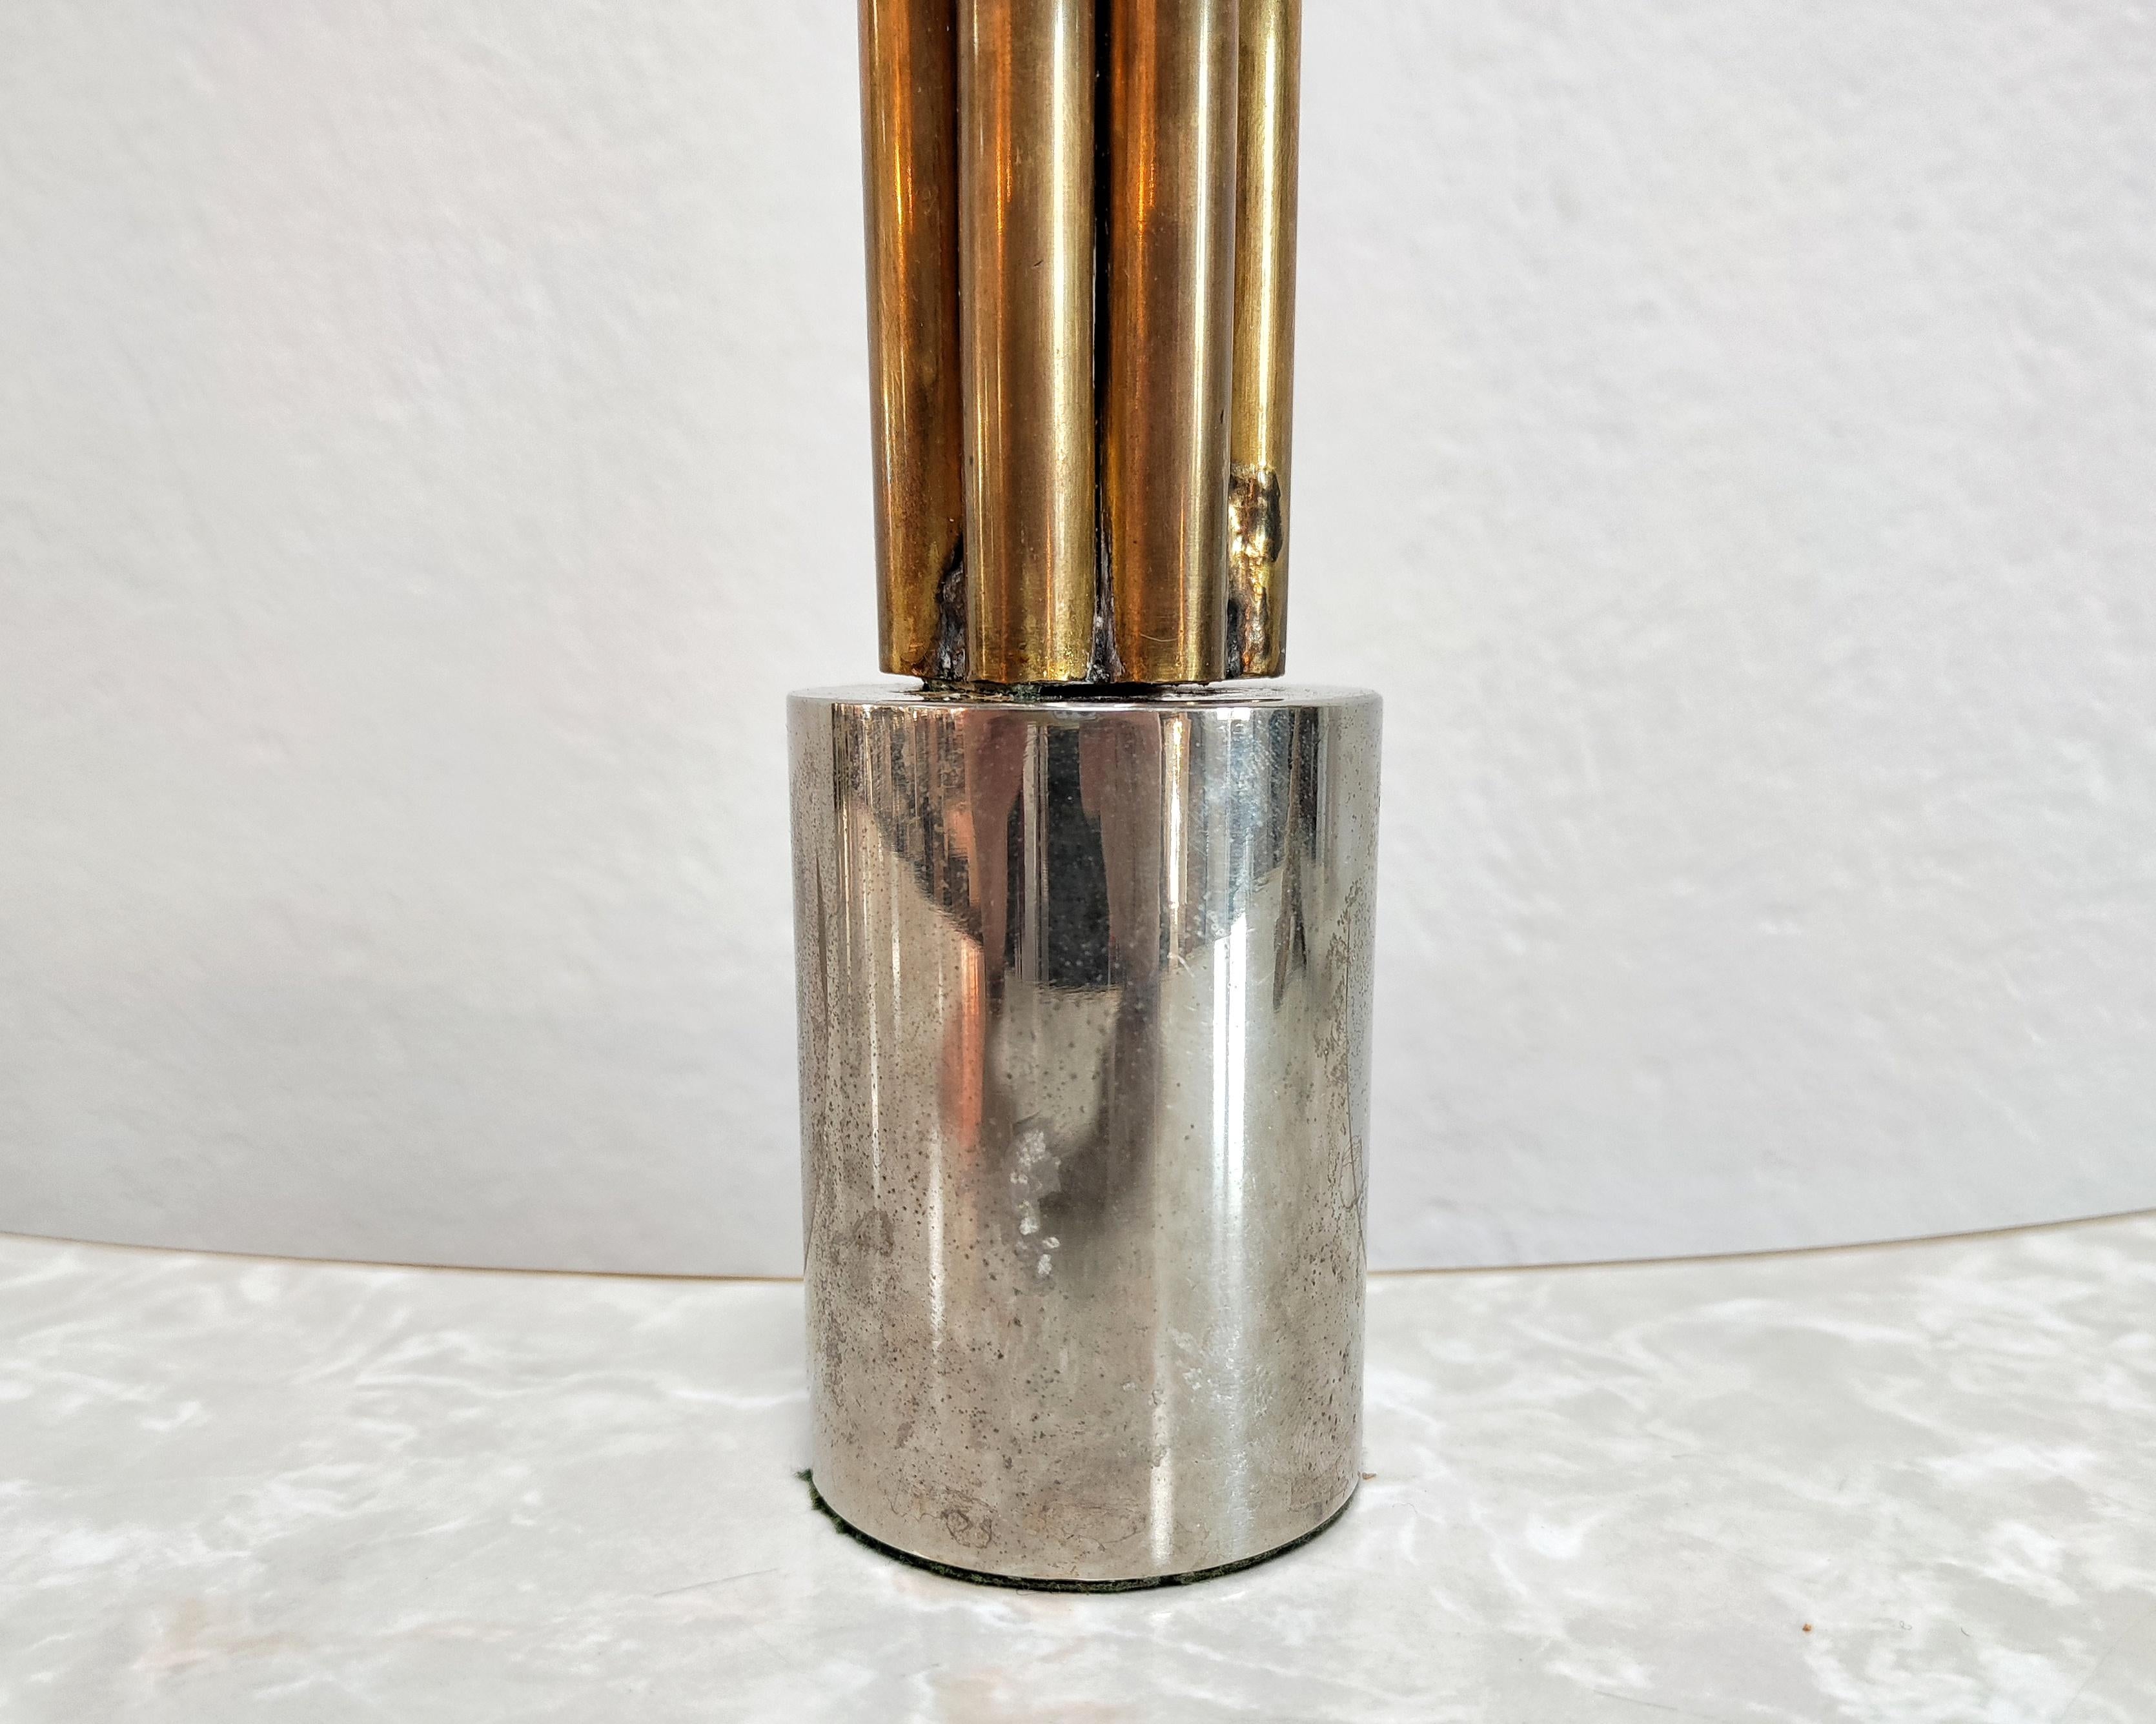 Brutalist Candlestick Holder Done in Brass and Nickel, Italy, 1970s For Sale 5